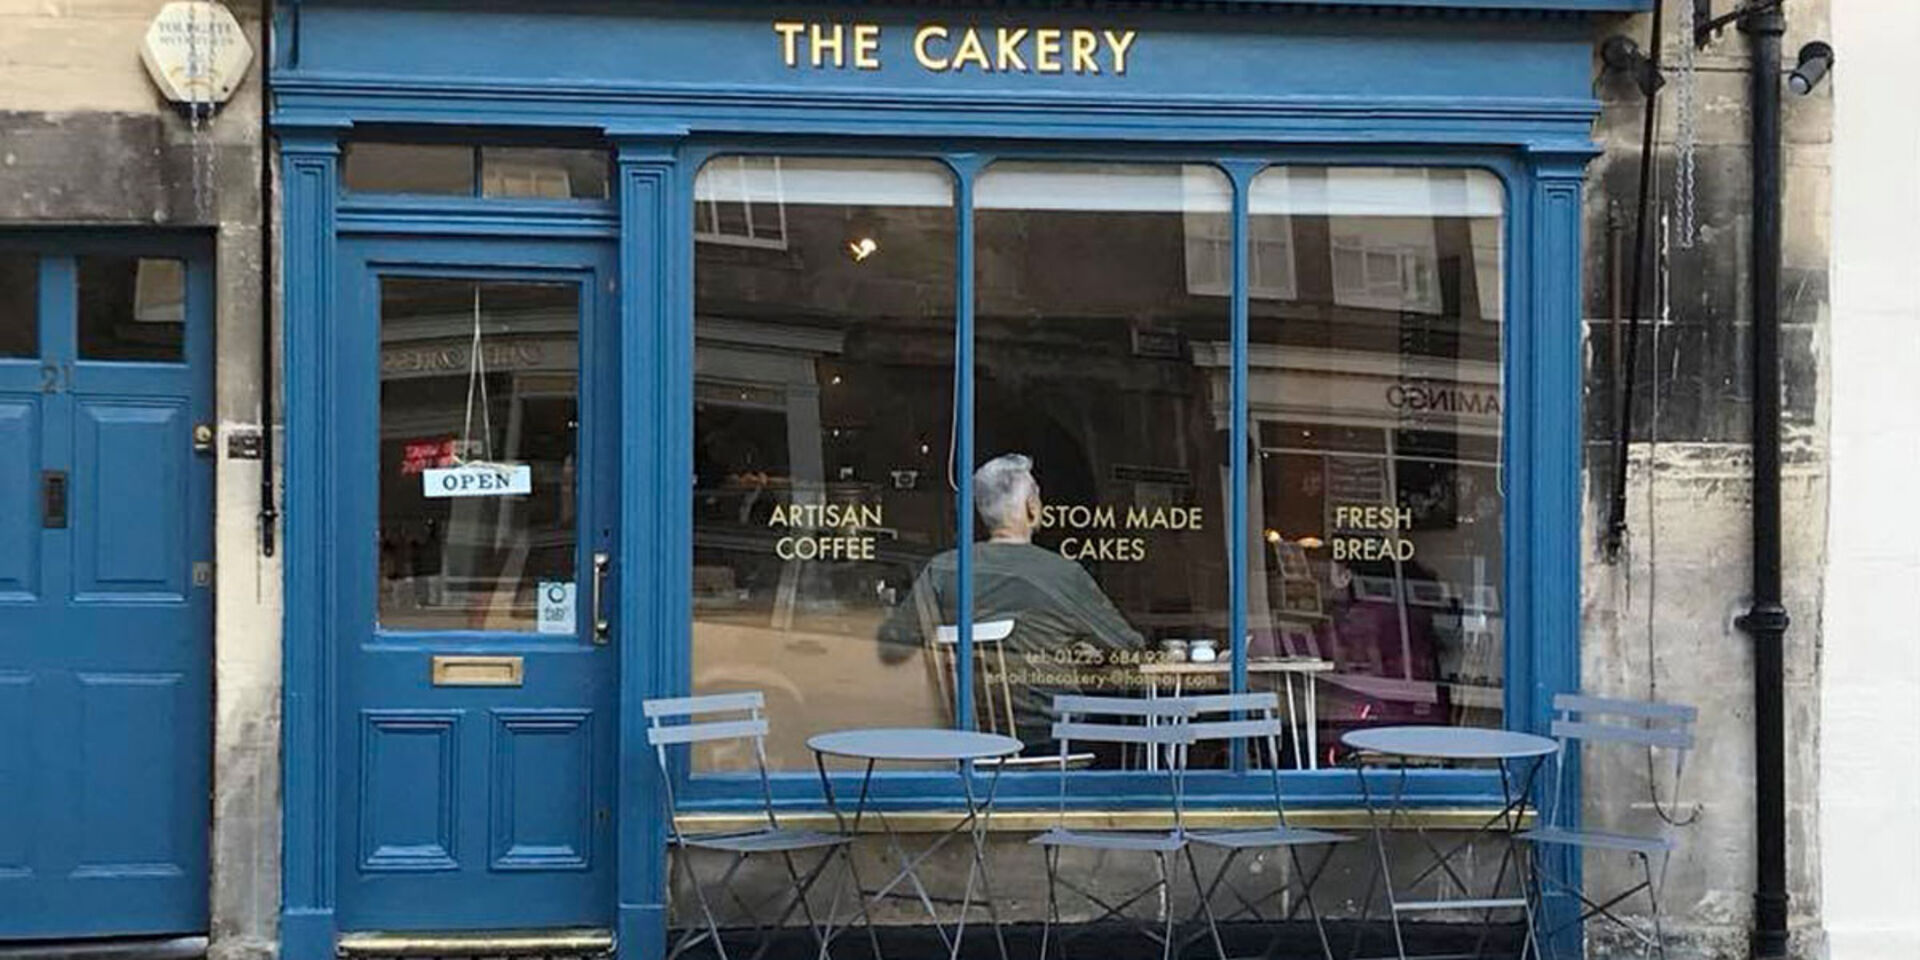 A photo of The Cakery